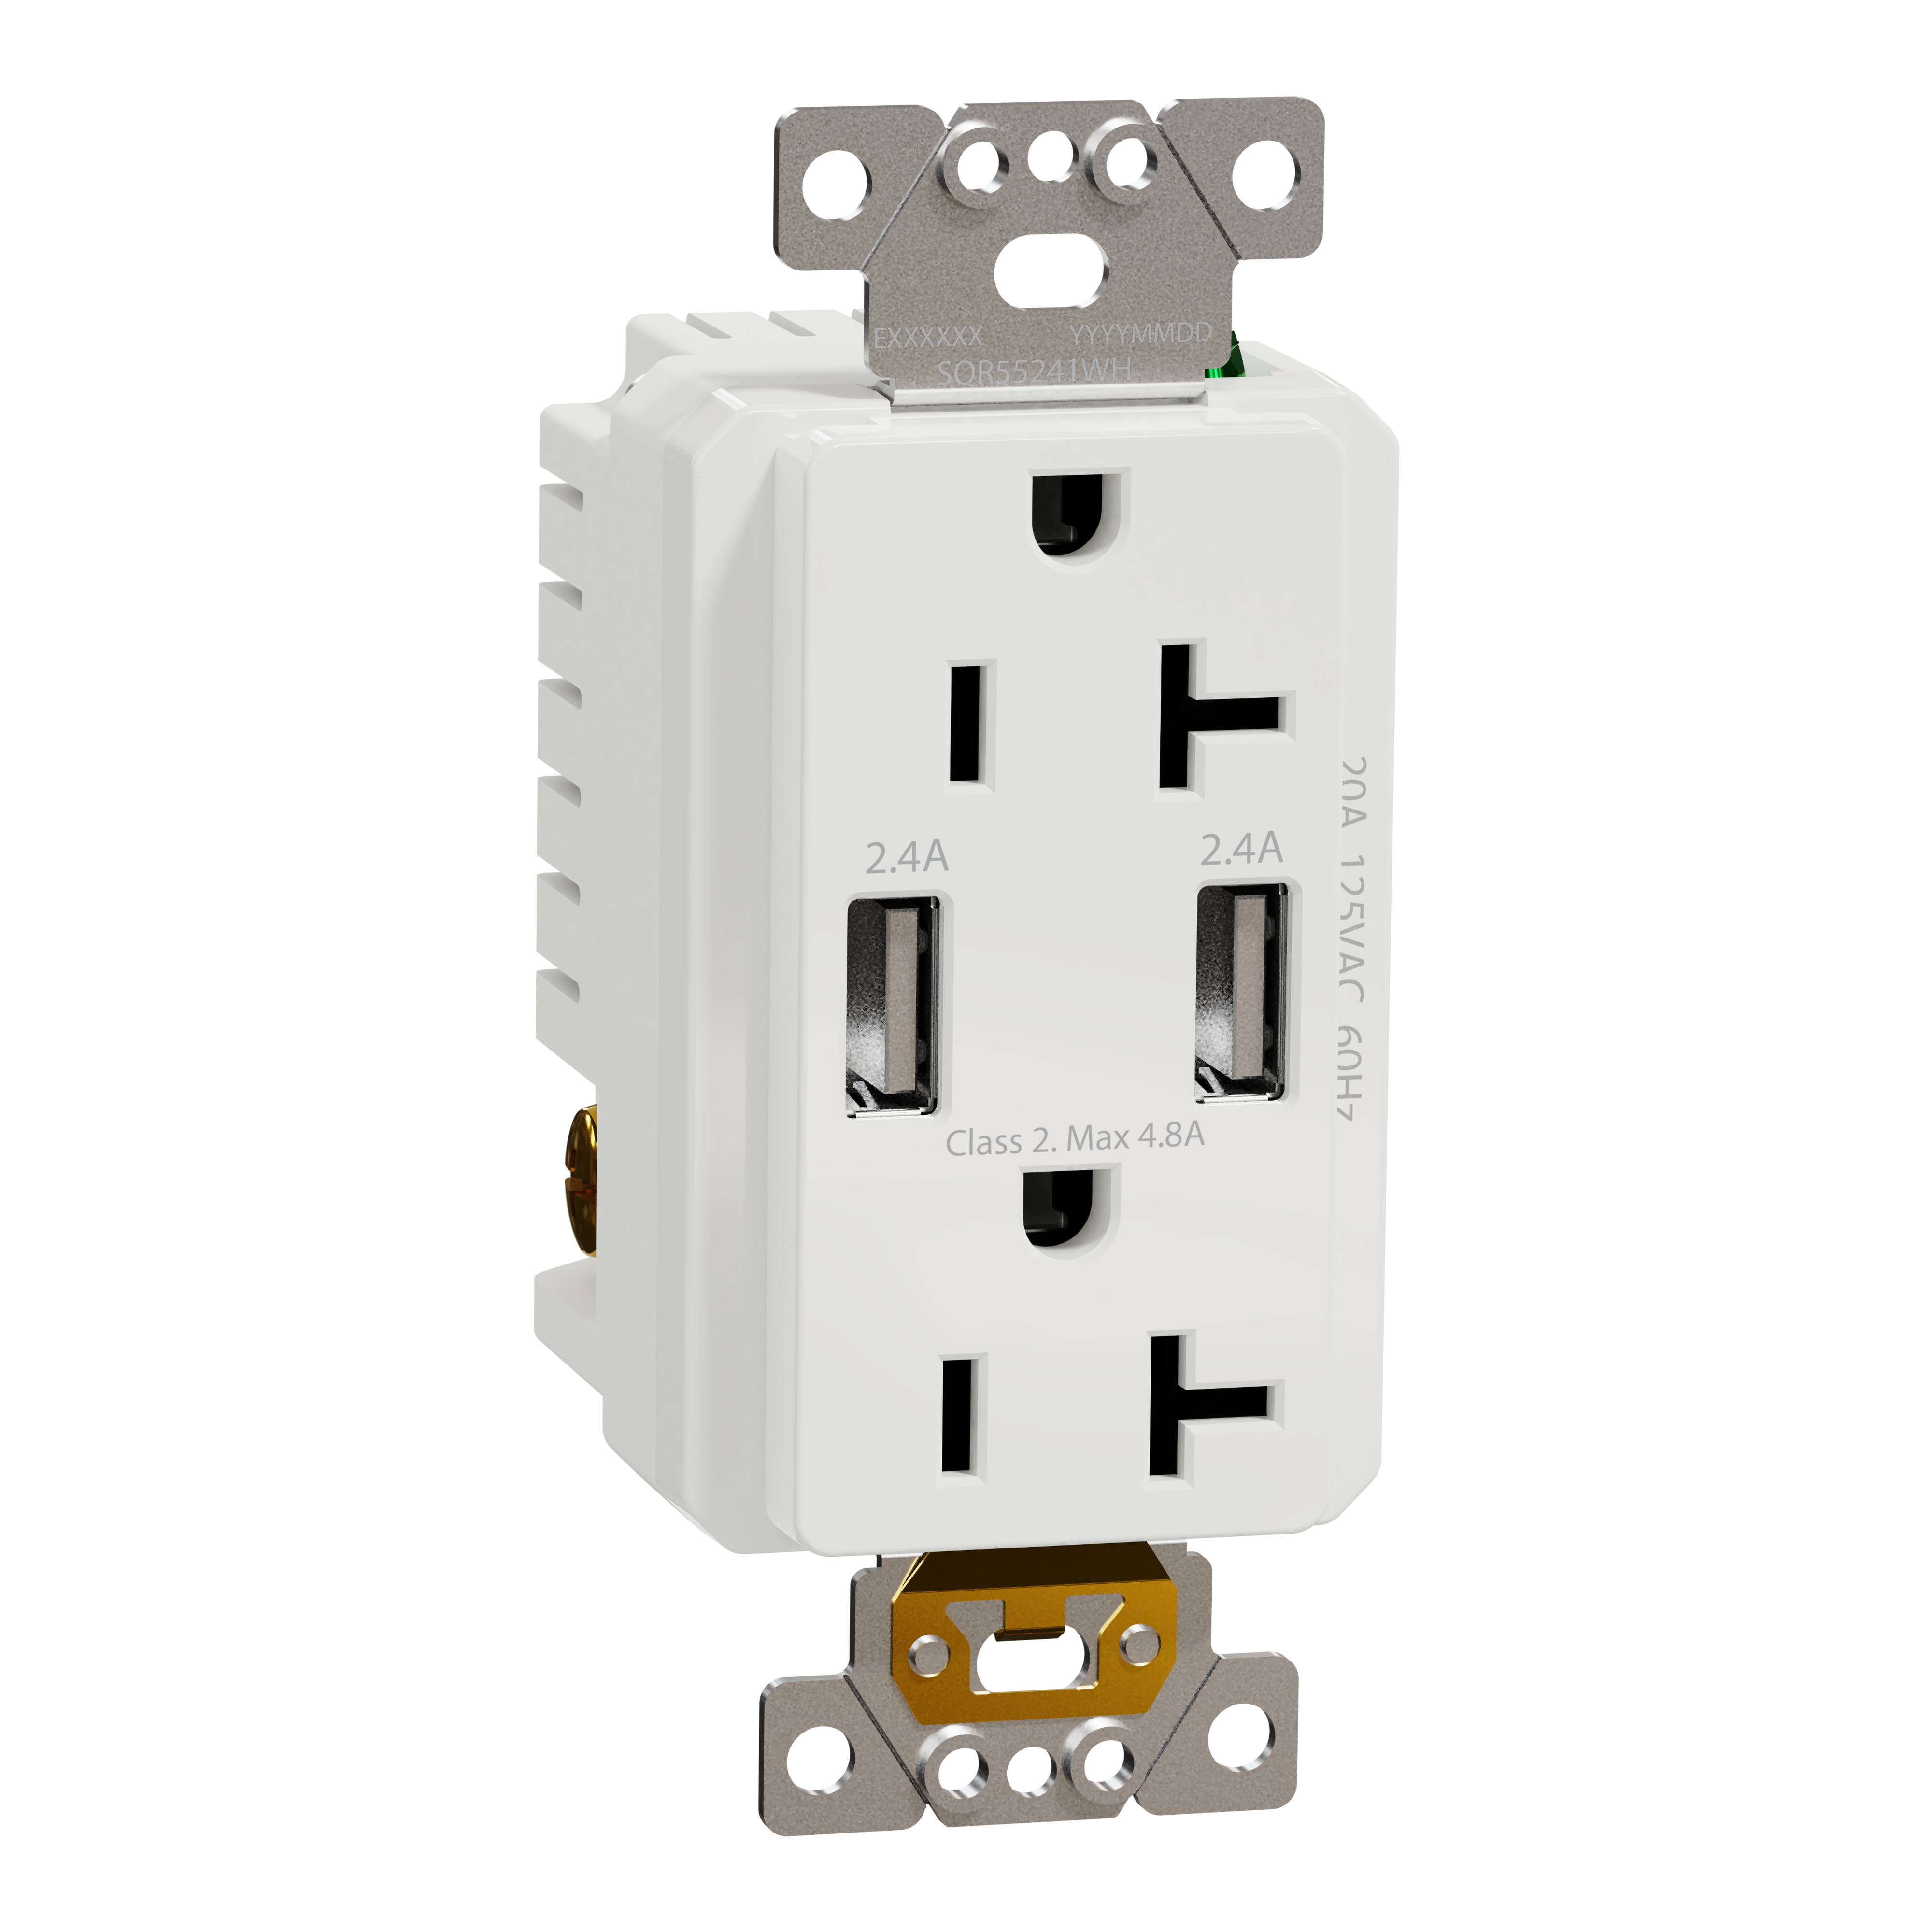 USB charger + socket-outlet, X Series, 20A socket, 4.8A USB A/A, duplex, tamper resistant, white, matte finish